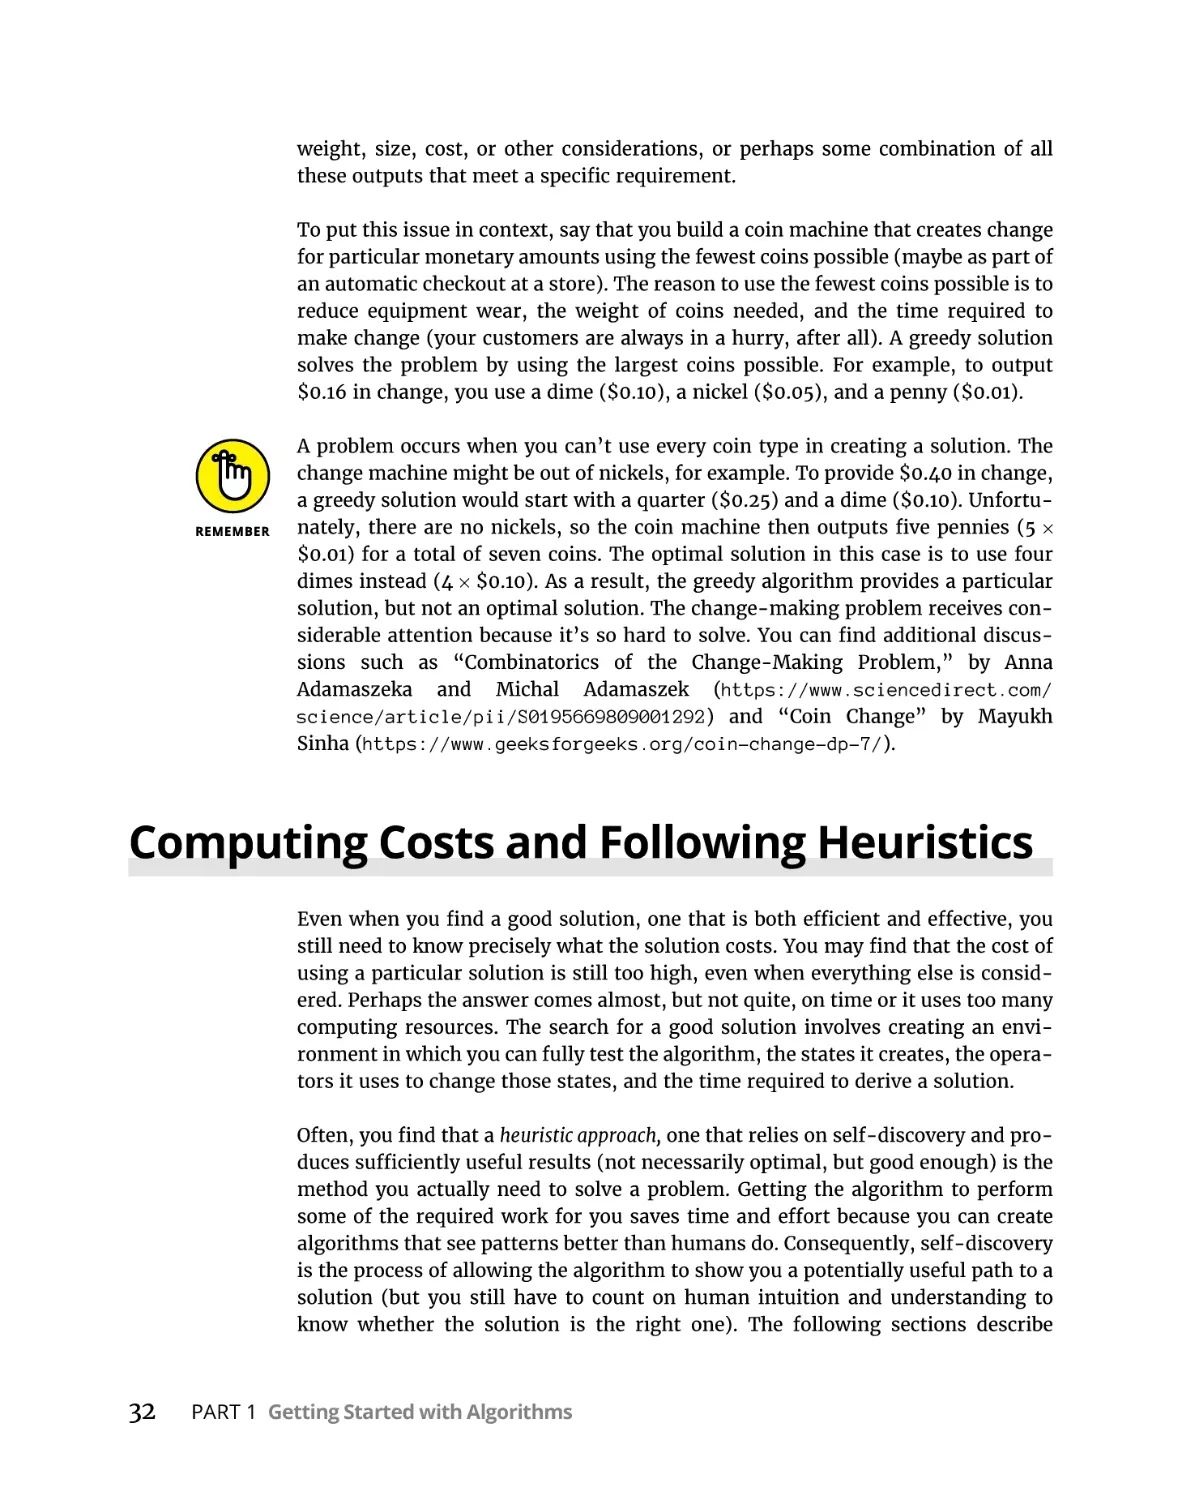 Computing Costs and Following Heuristics